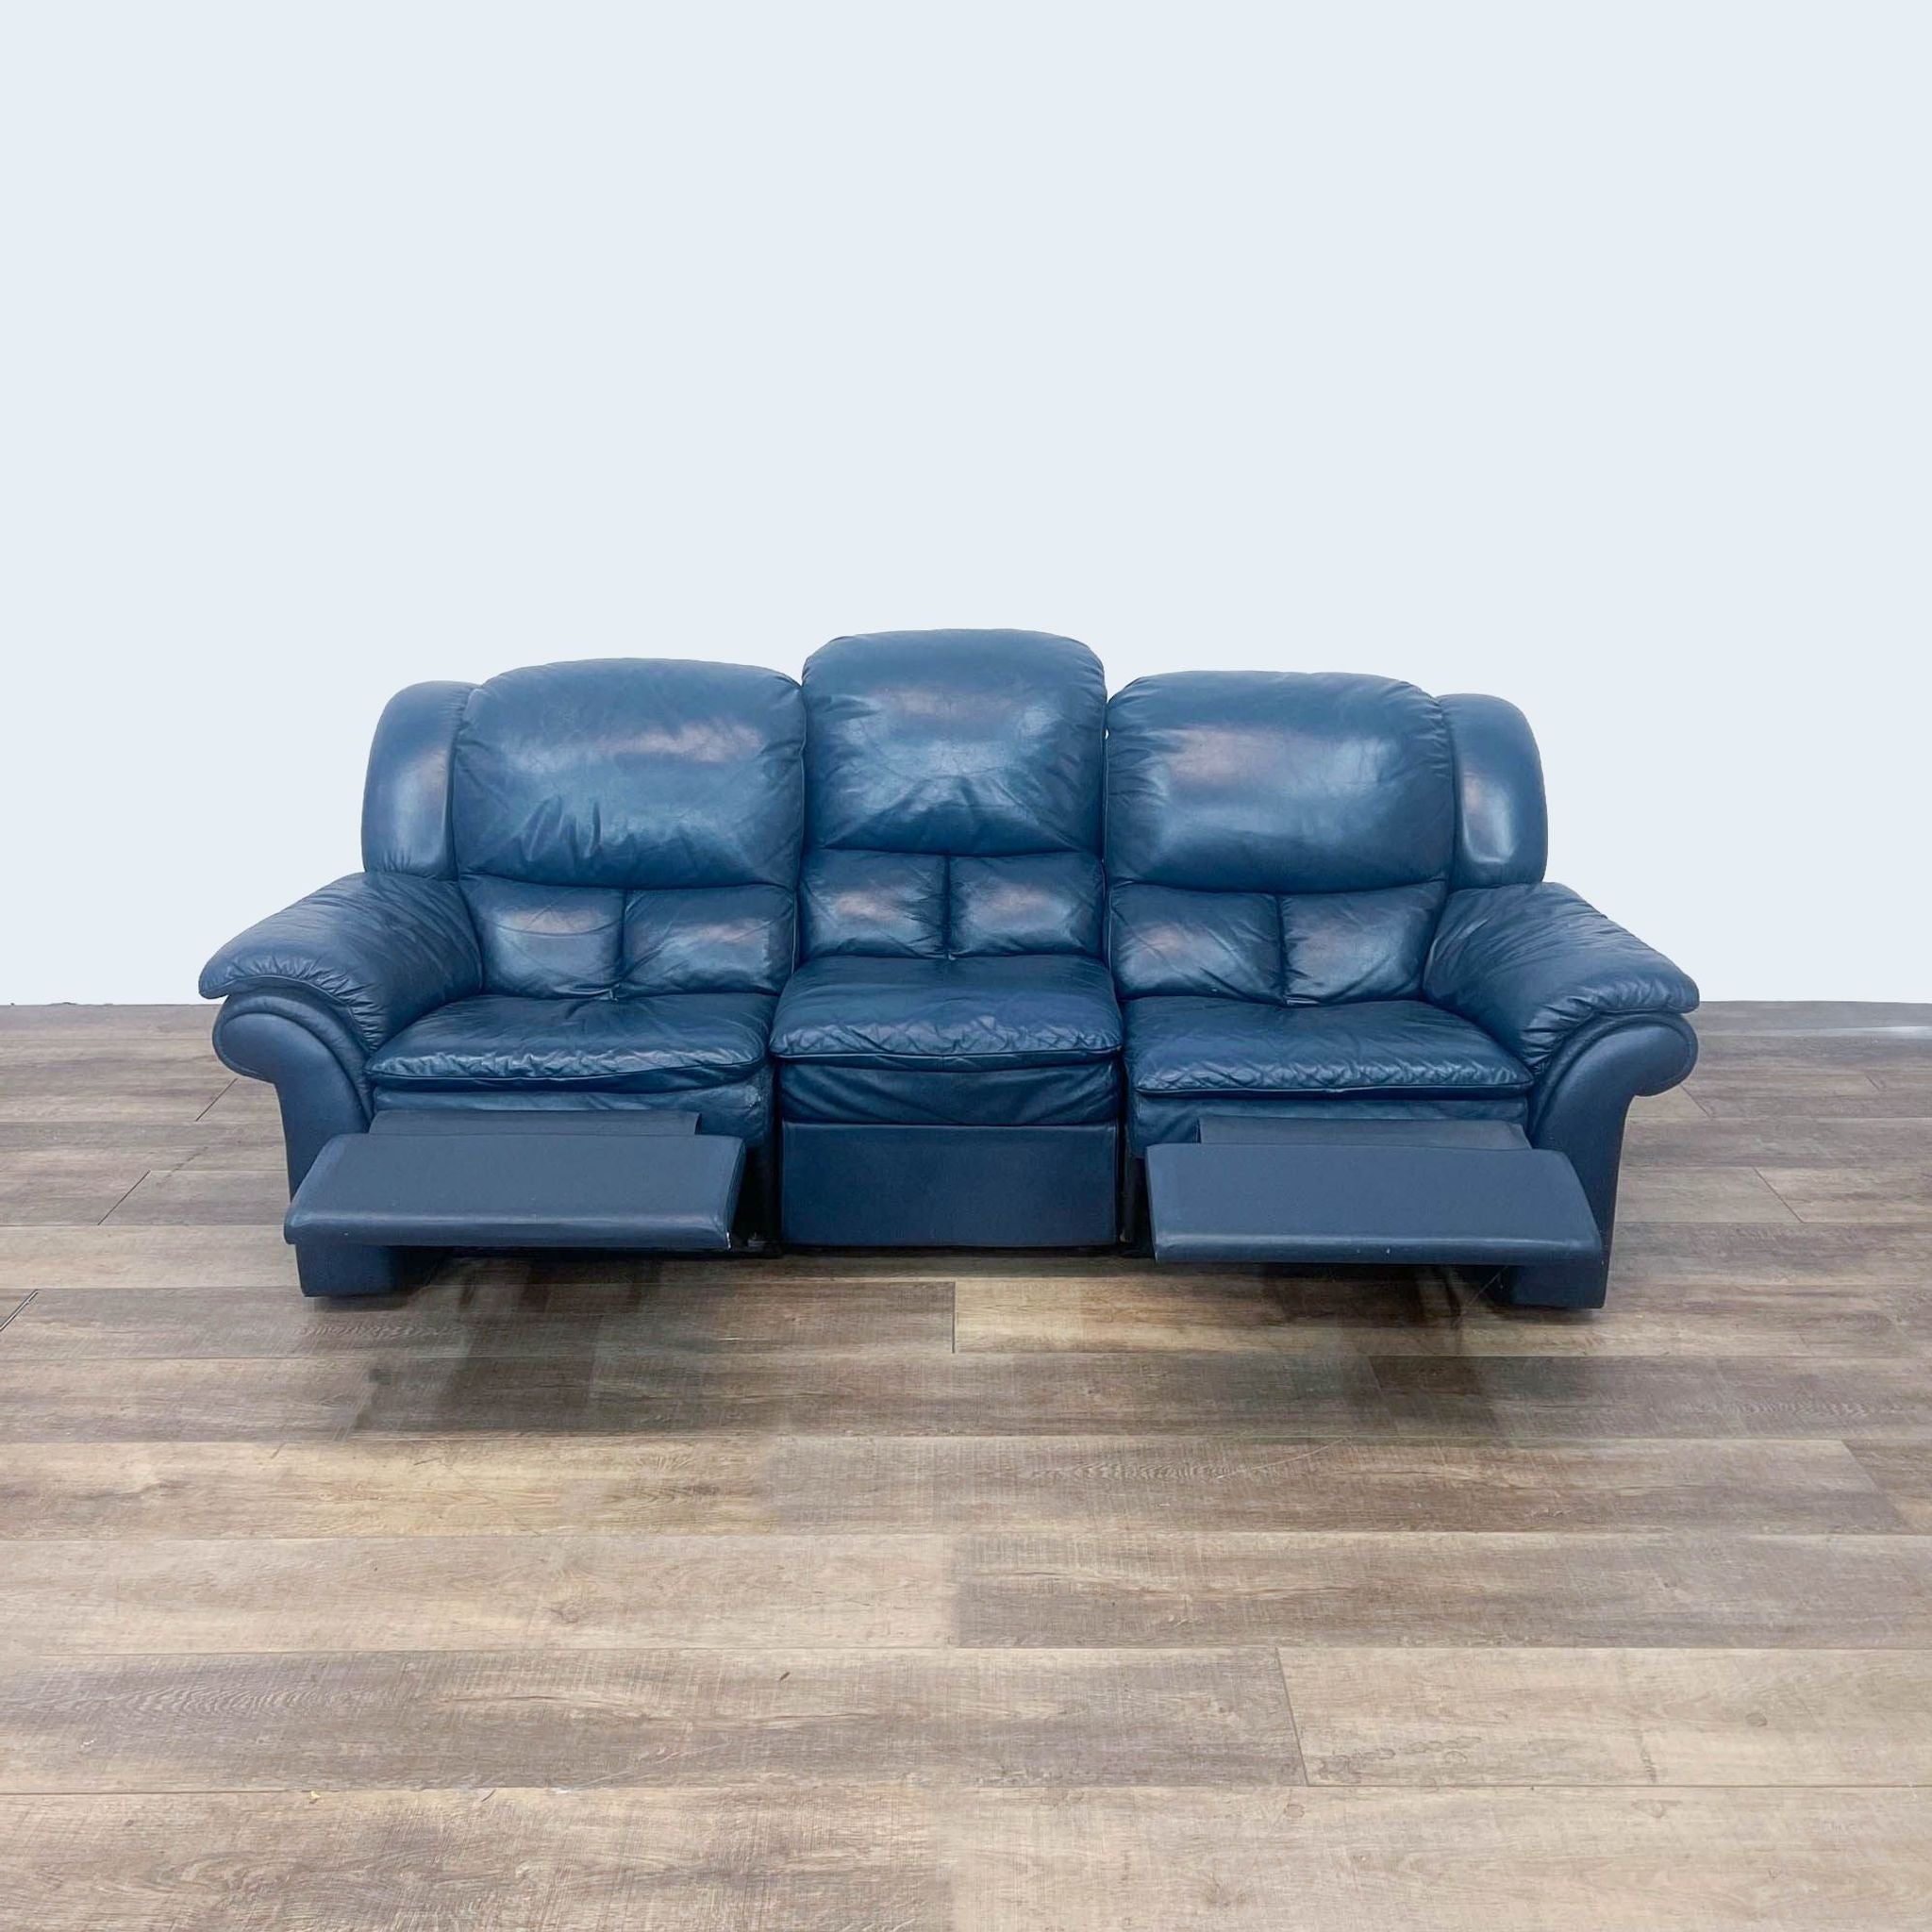 Reperch 3-seat leather sofa in dark blue with reclining seats, depicted with one seat partially reclined.